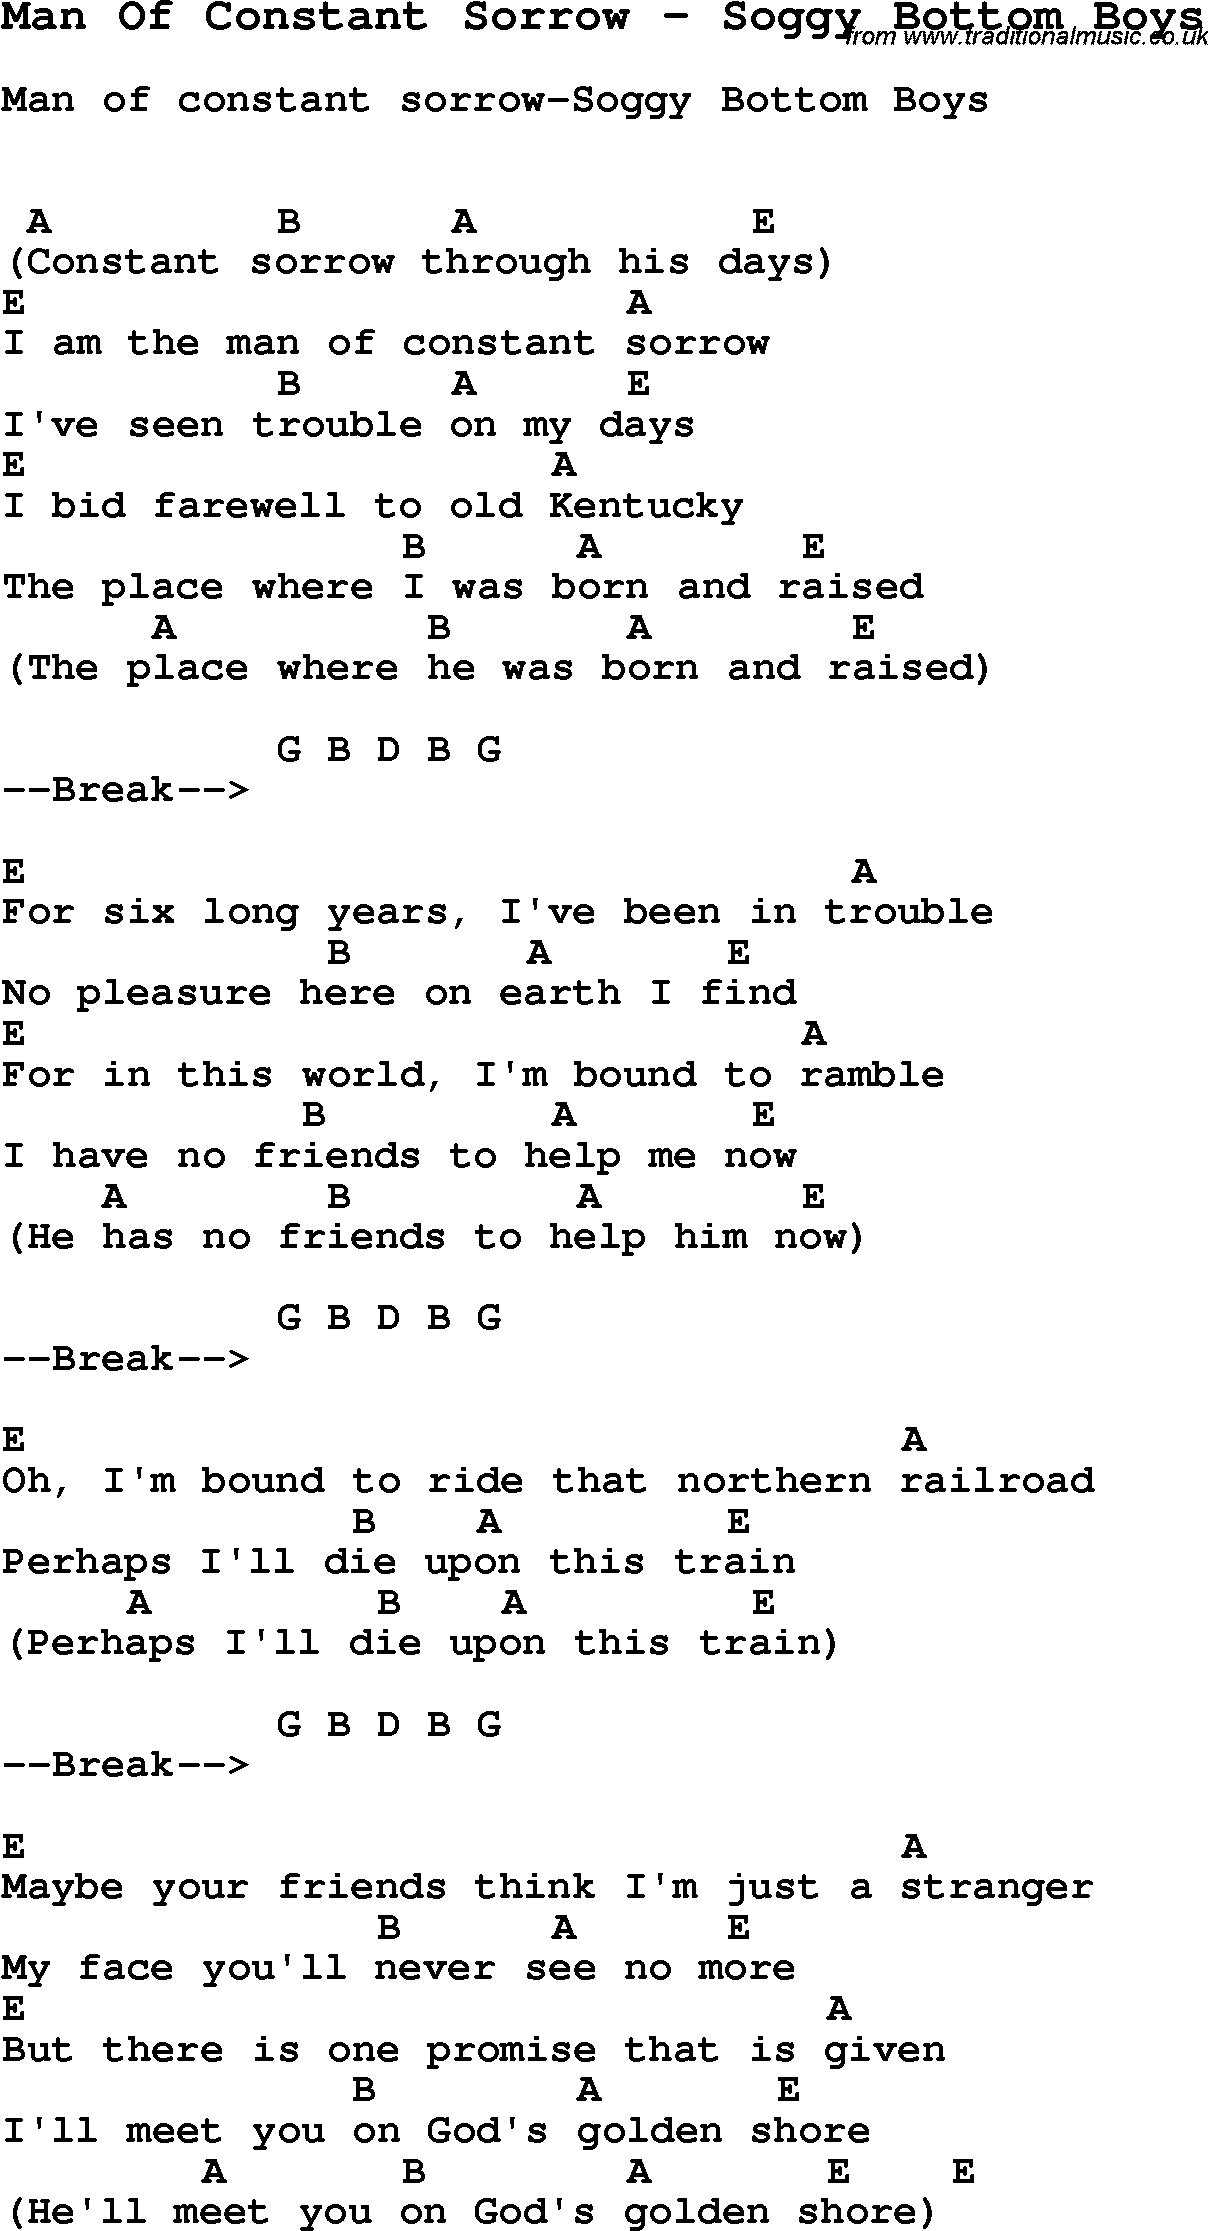 Song Man Of Constant Sorrow by Soggy Bottom Boys, with lyrics for vocal performance and accompaniment chords for Ukulele, Guitar Banjo etc.